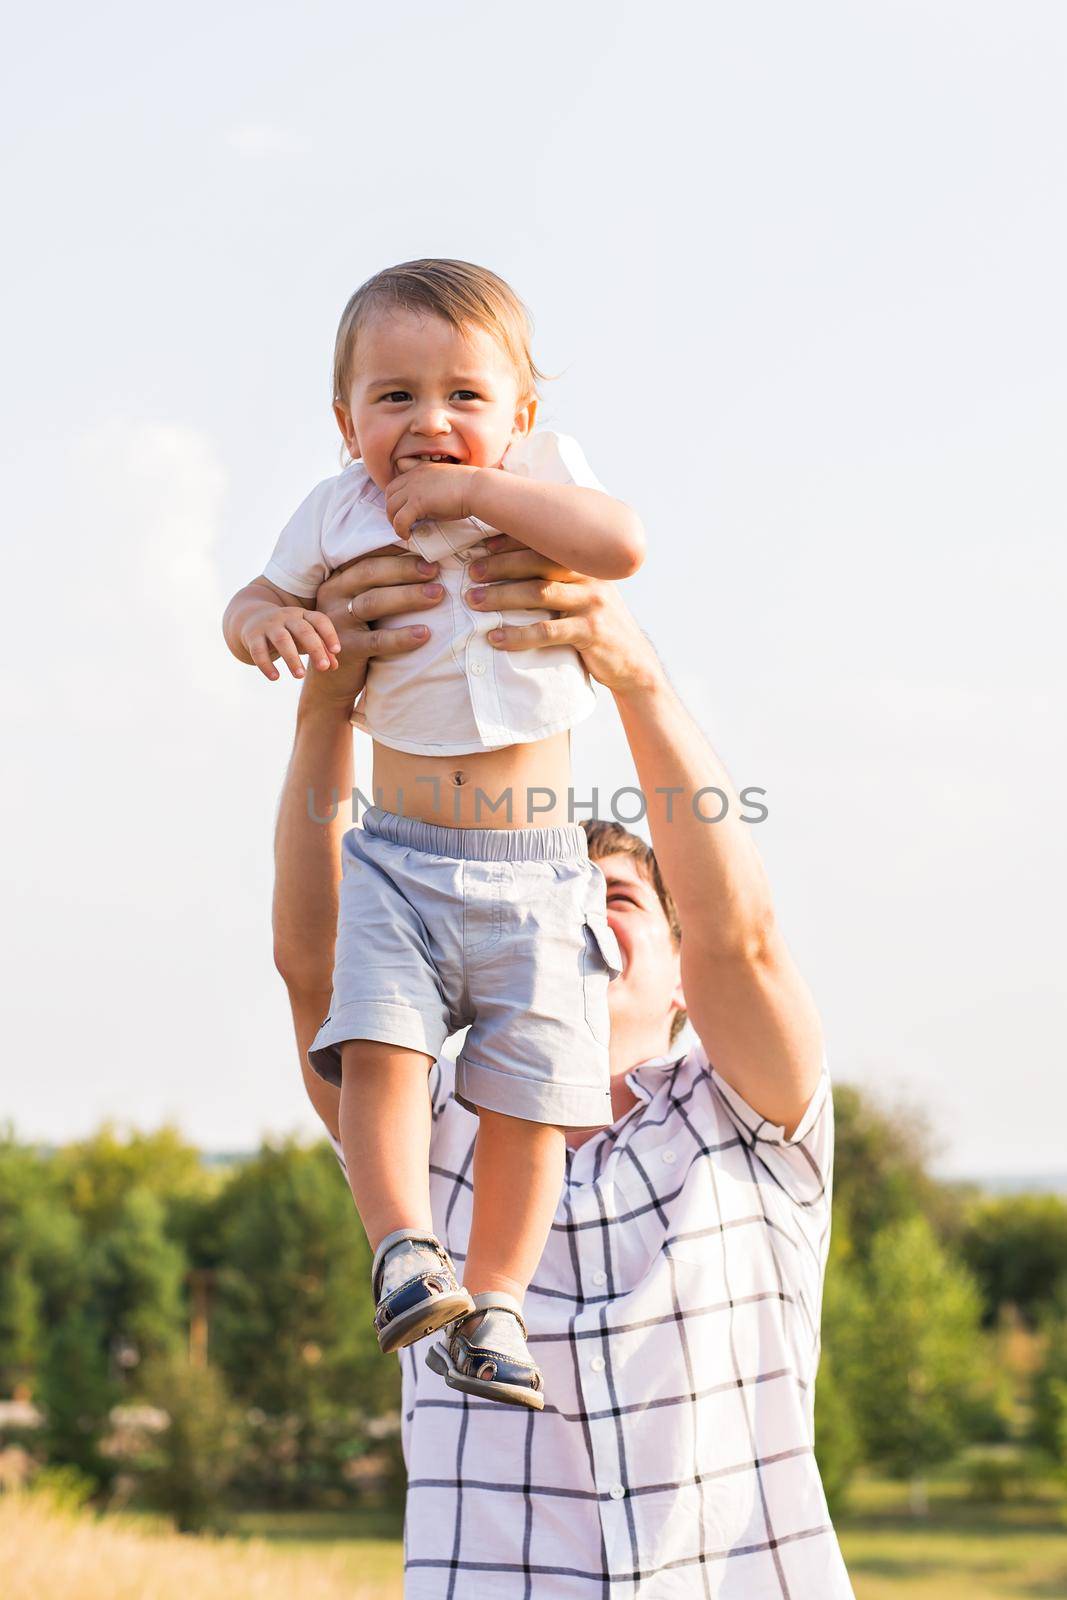 Happy young father and son playing together and having fun in the summer or autumn field. Family, child, fatherhood and nature concept.